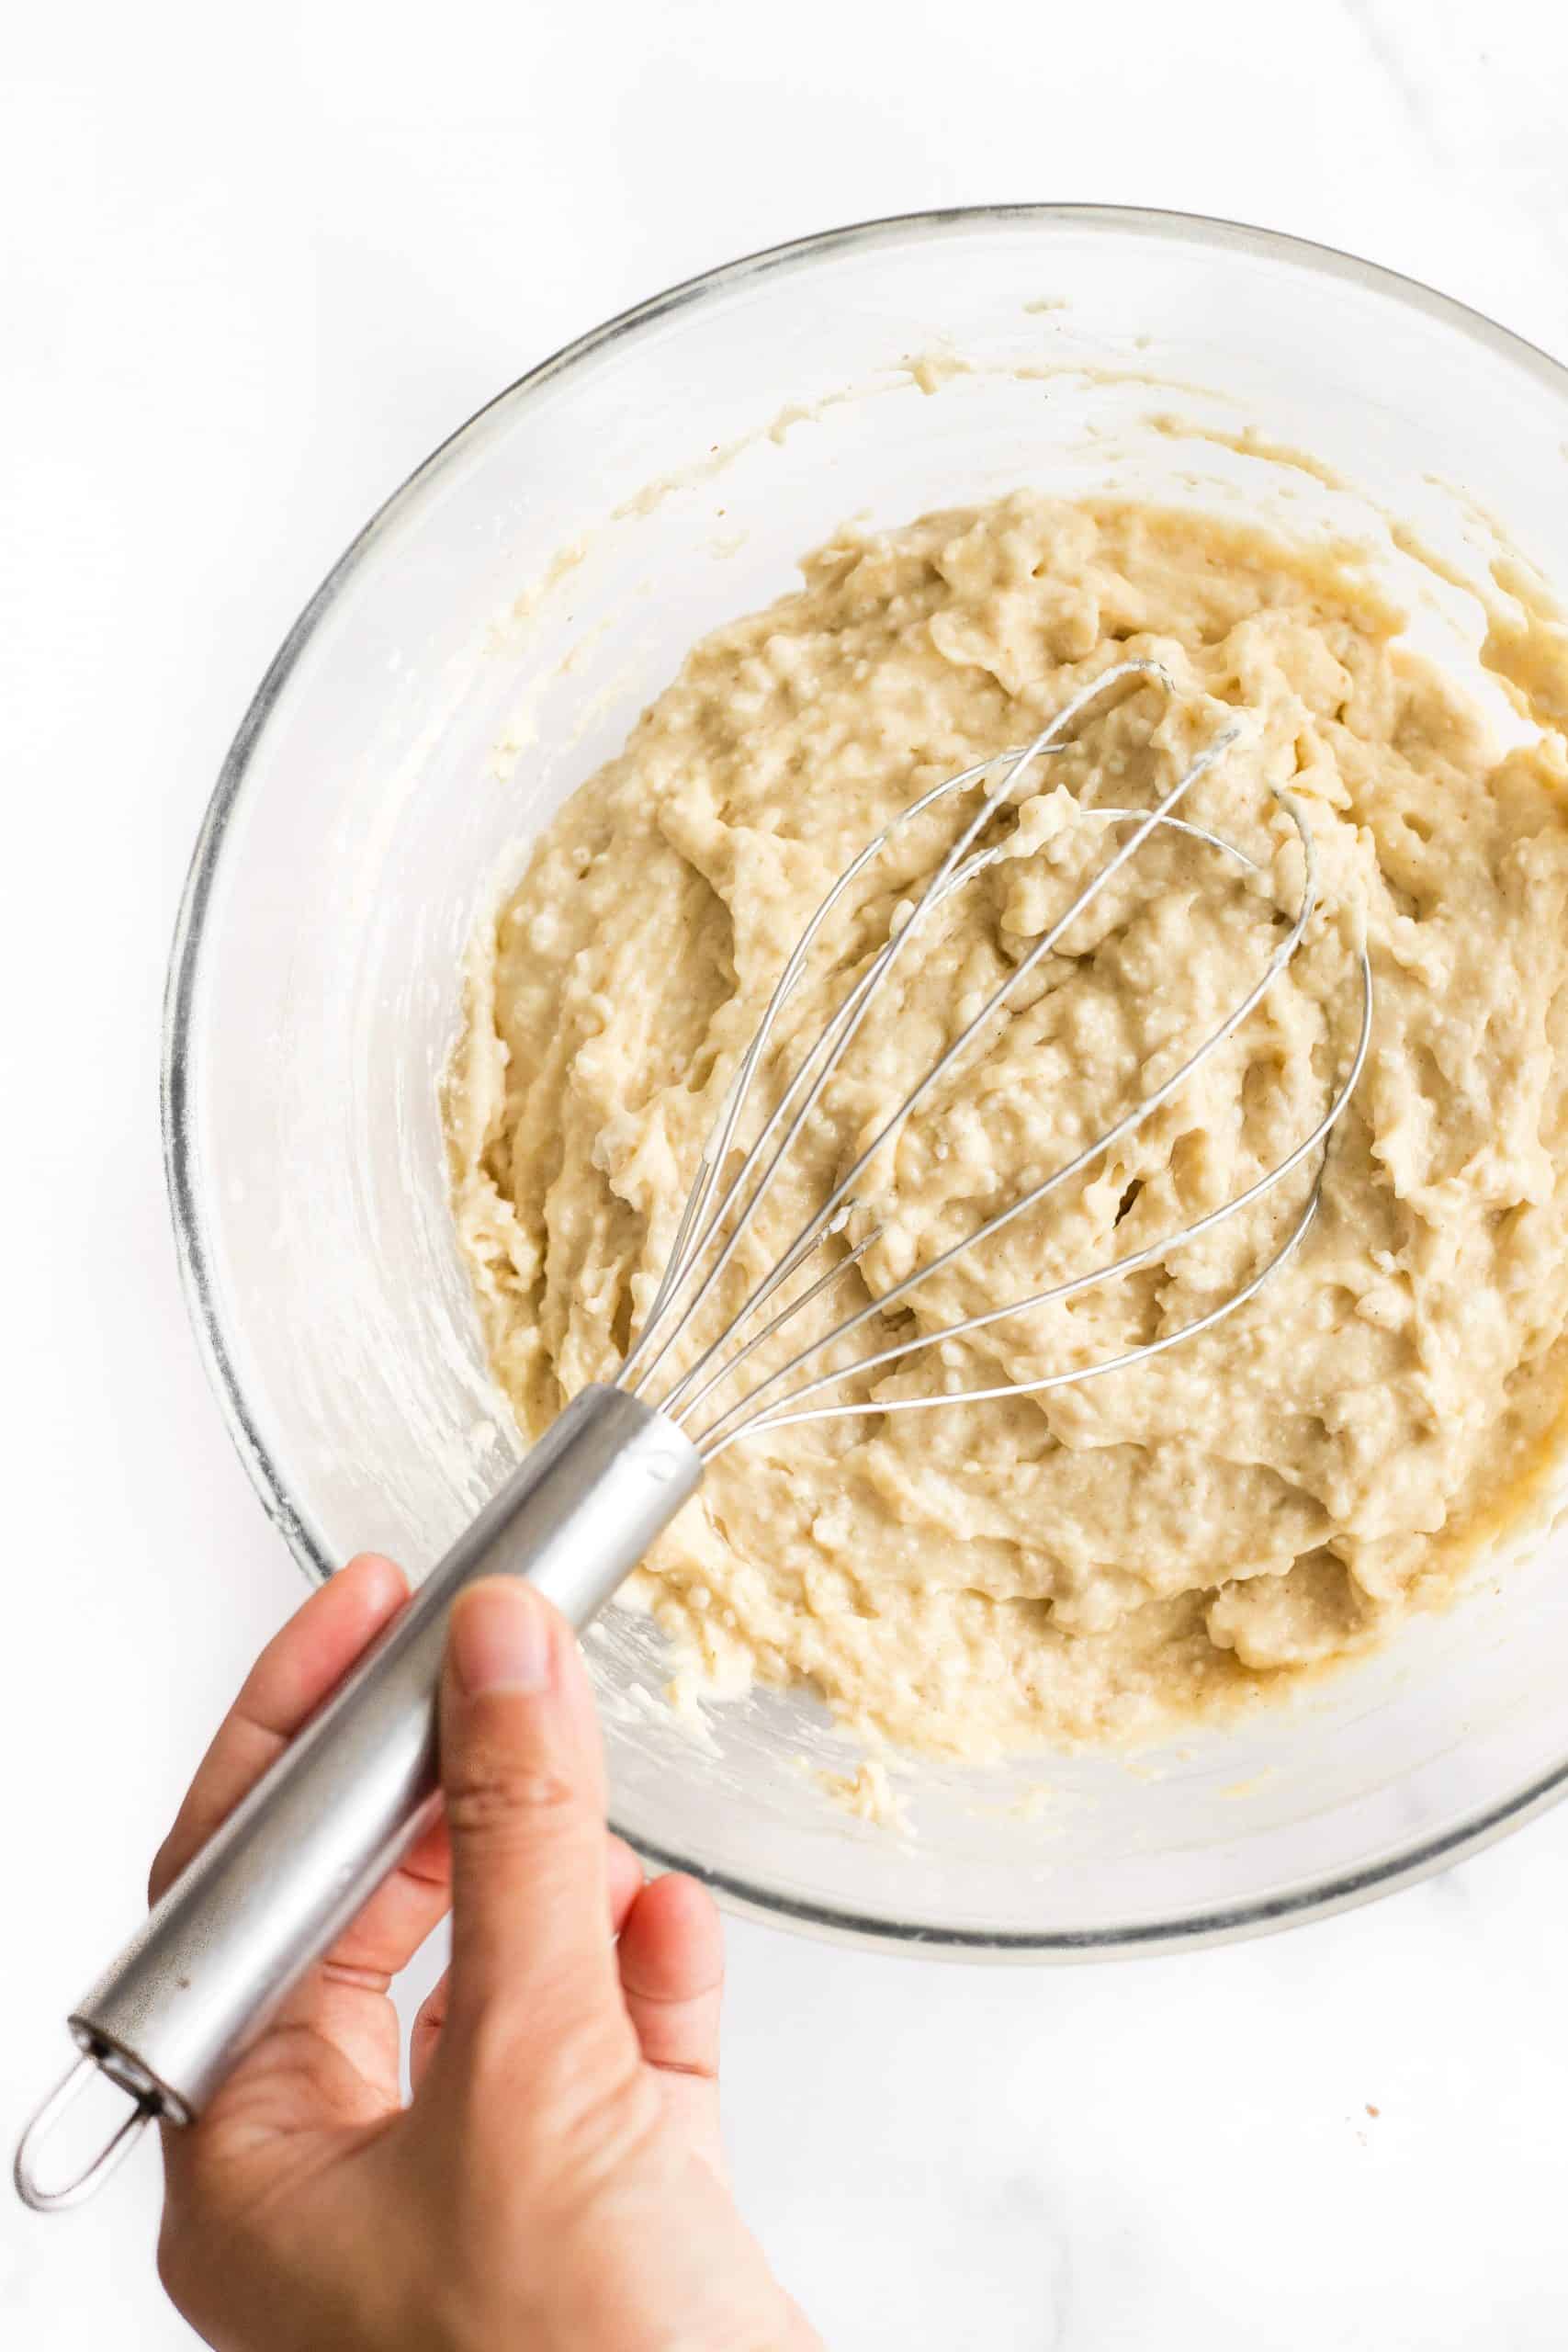 Using a whisk to mix dough in a glass bowl.